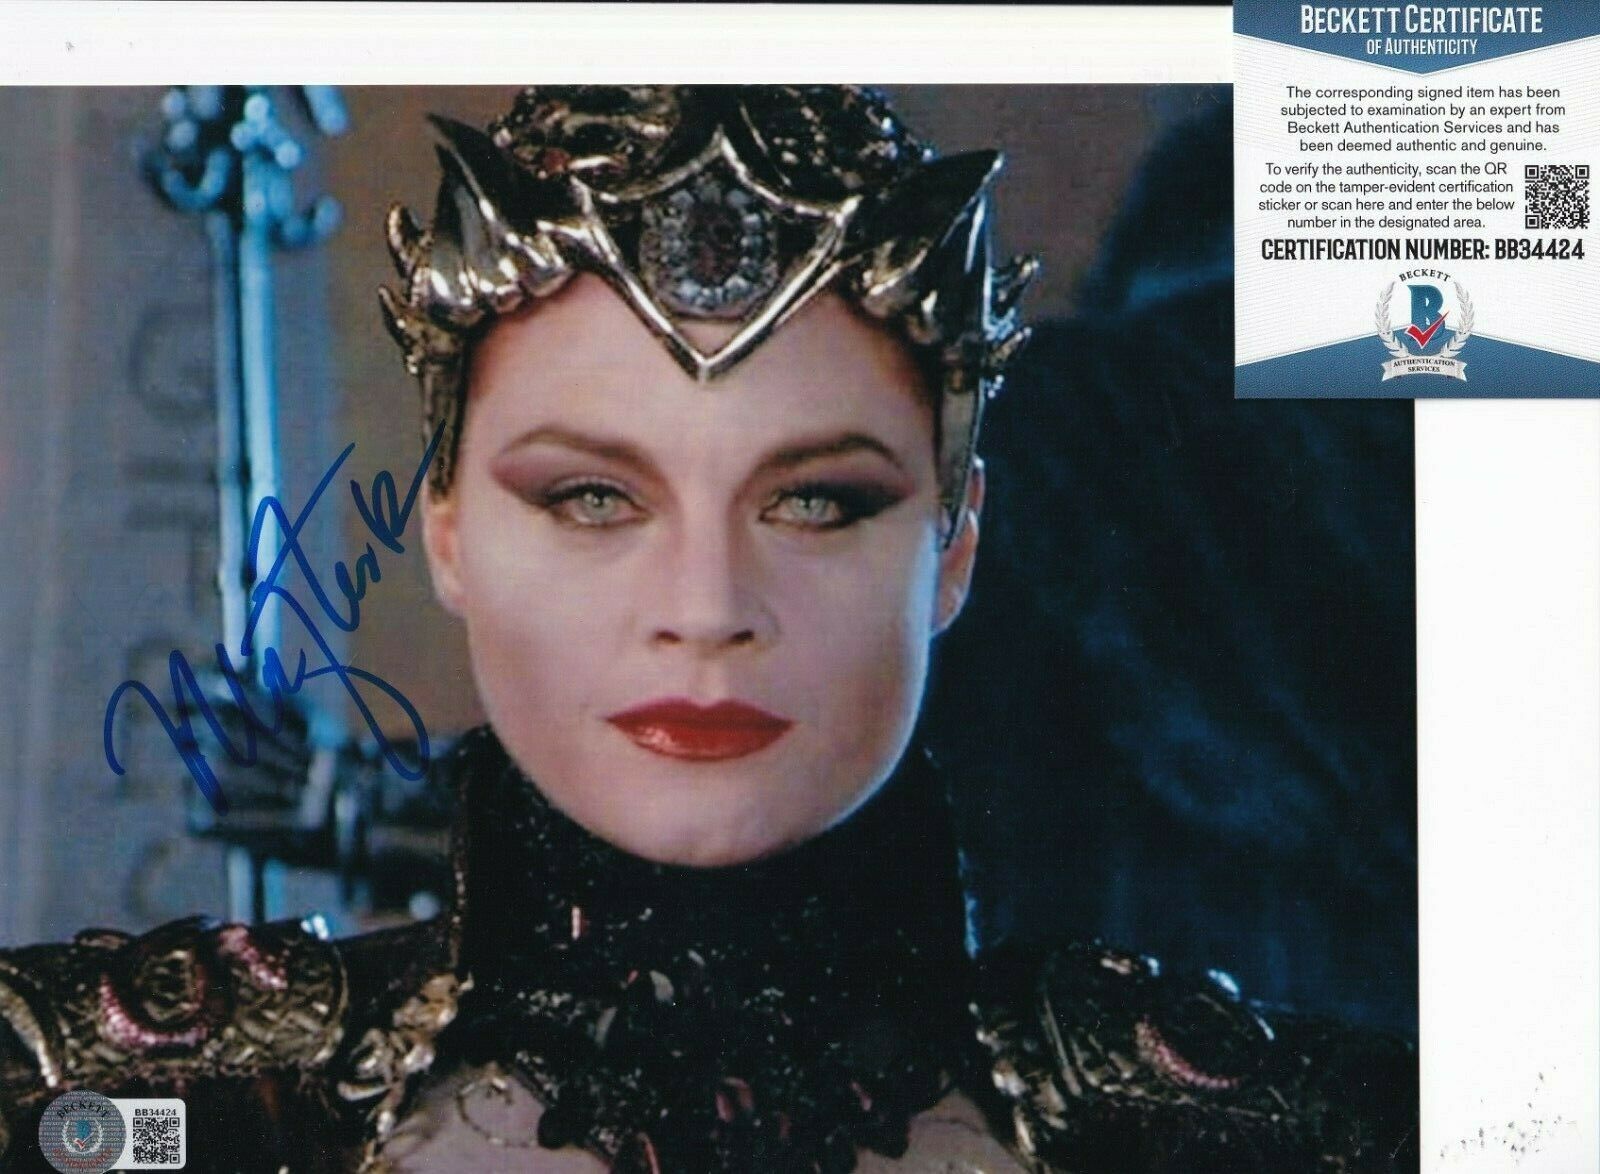 MEG FOSTER SIGNED (MASTERS OF THE UNIVERSE) MOVIE 8X10 PHOTO BECKETT BAS BB34424 COLLECTIBLE MEMORABILIA